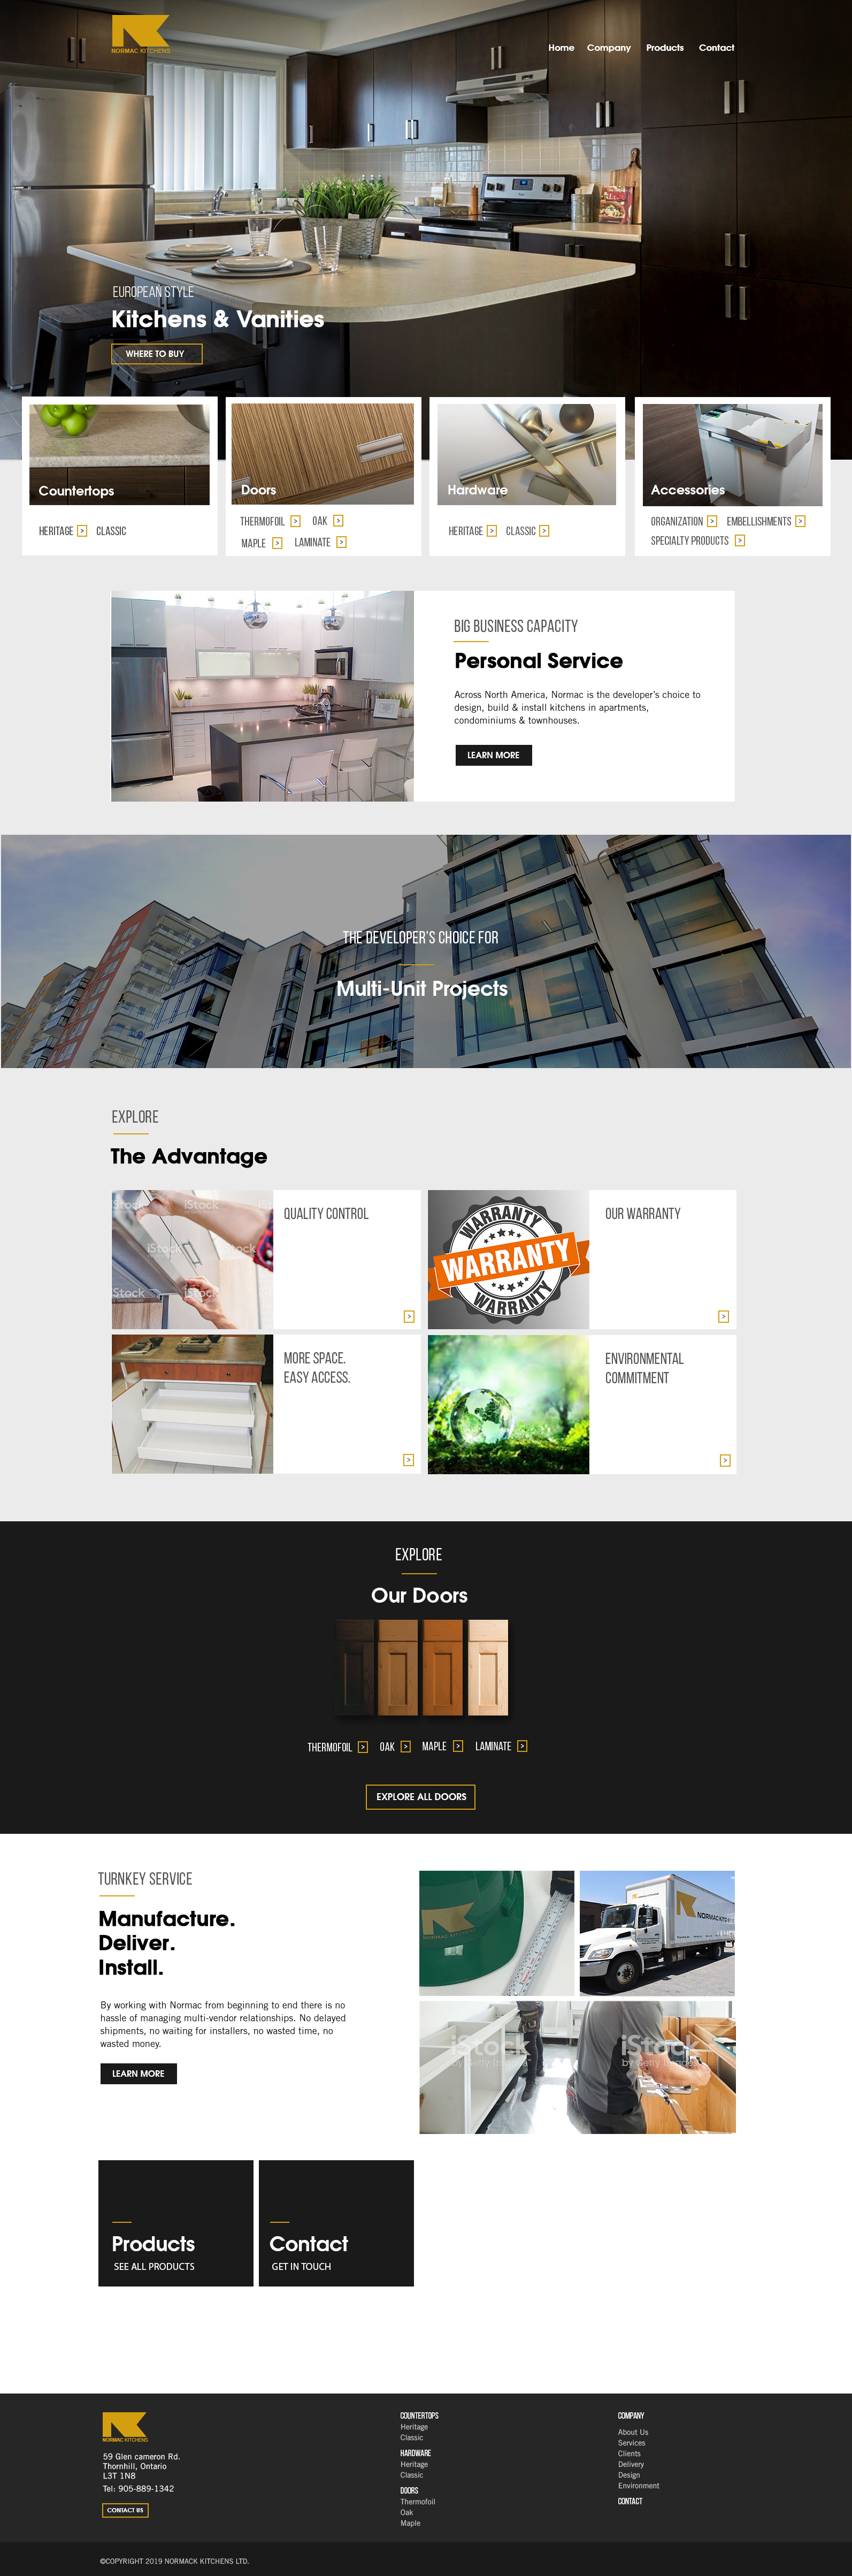 Normac Kitchens Homepage Concept